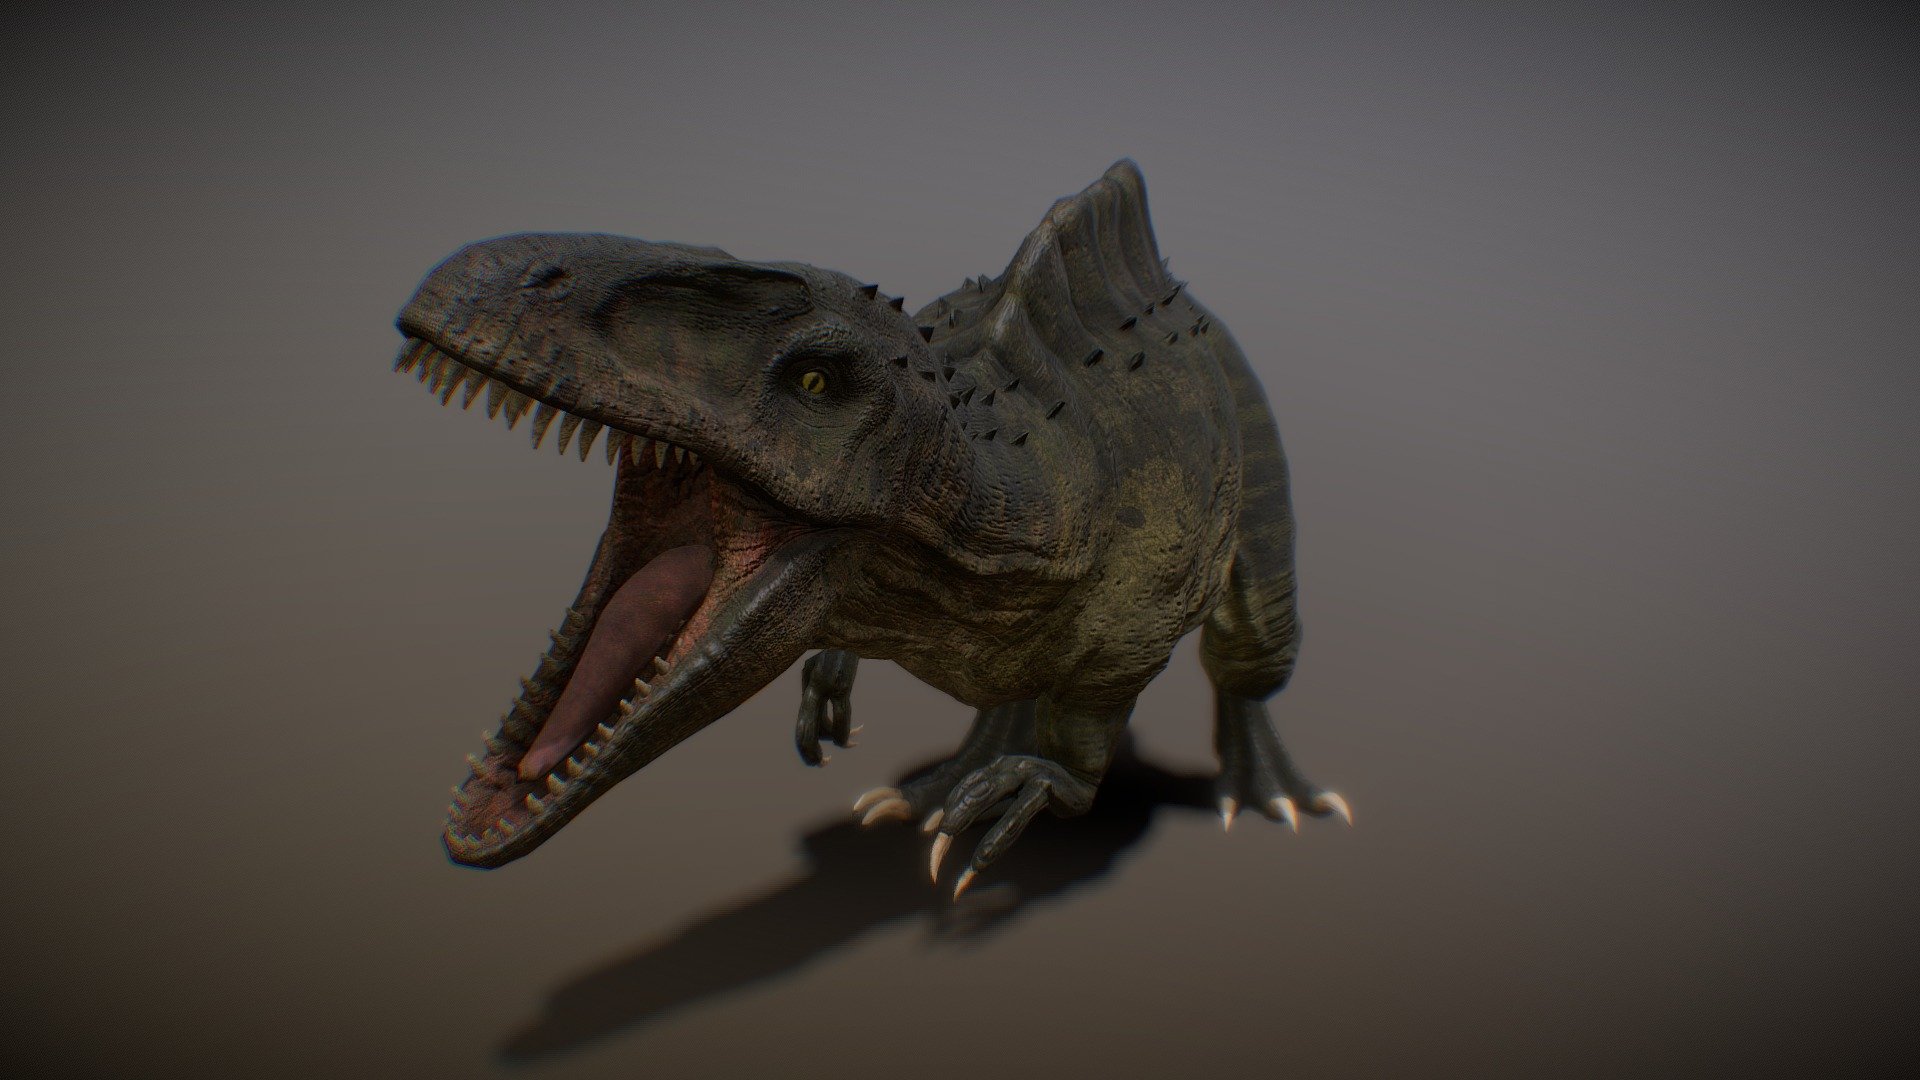 A simple Acrocanthosaurus Model With few animations.
Game Ready
1 set of textures : Diffuse -Normal Map - Metal/Rougness/AO
4 animations :
1. Idle
2. Walk
3. Houl
4. Dancing - Acrocanthosaurus Animated (GameReady) - Buy Royalty Free 3D model by BlackantMaster 3d model